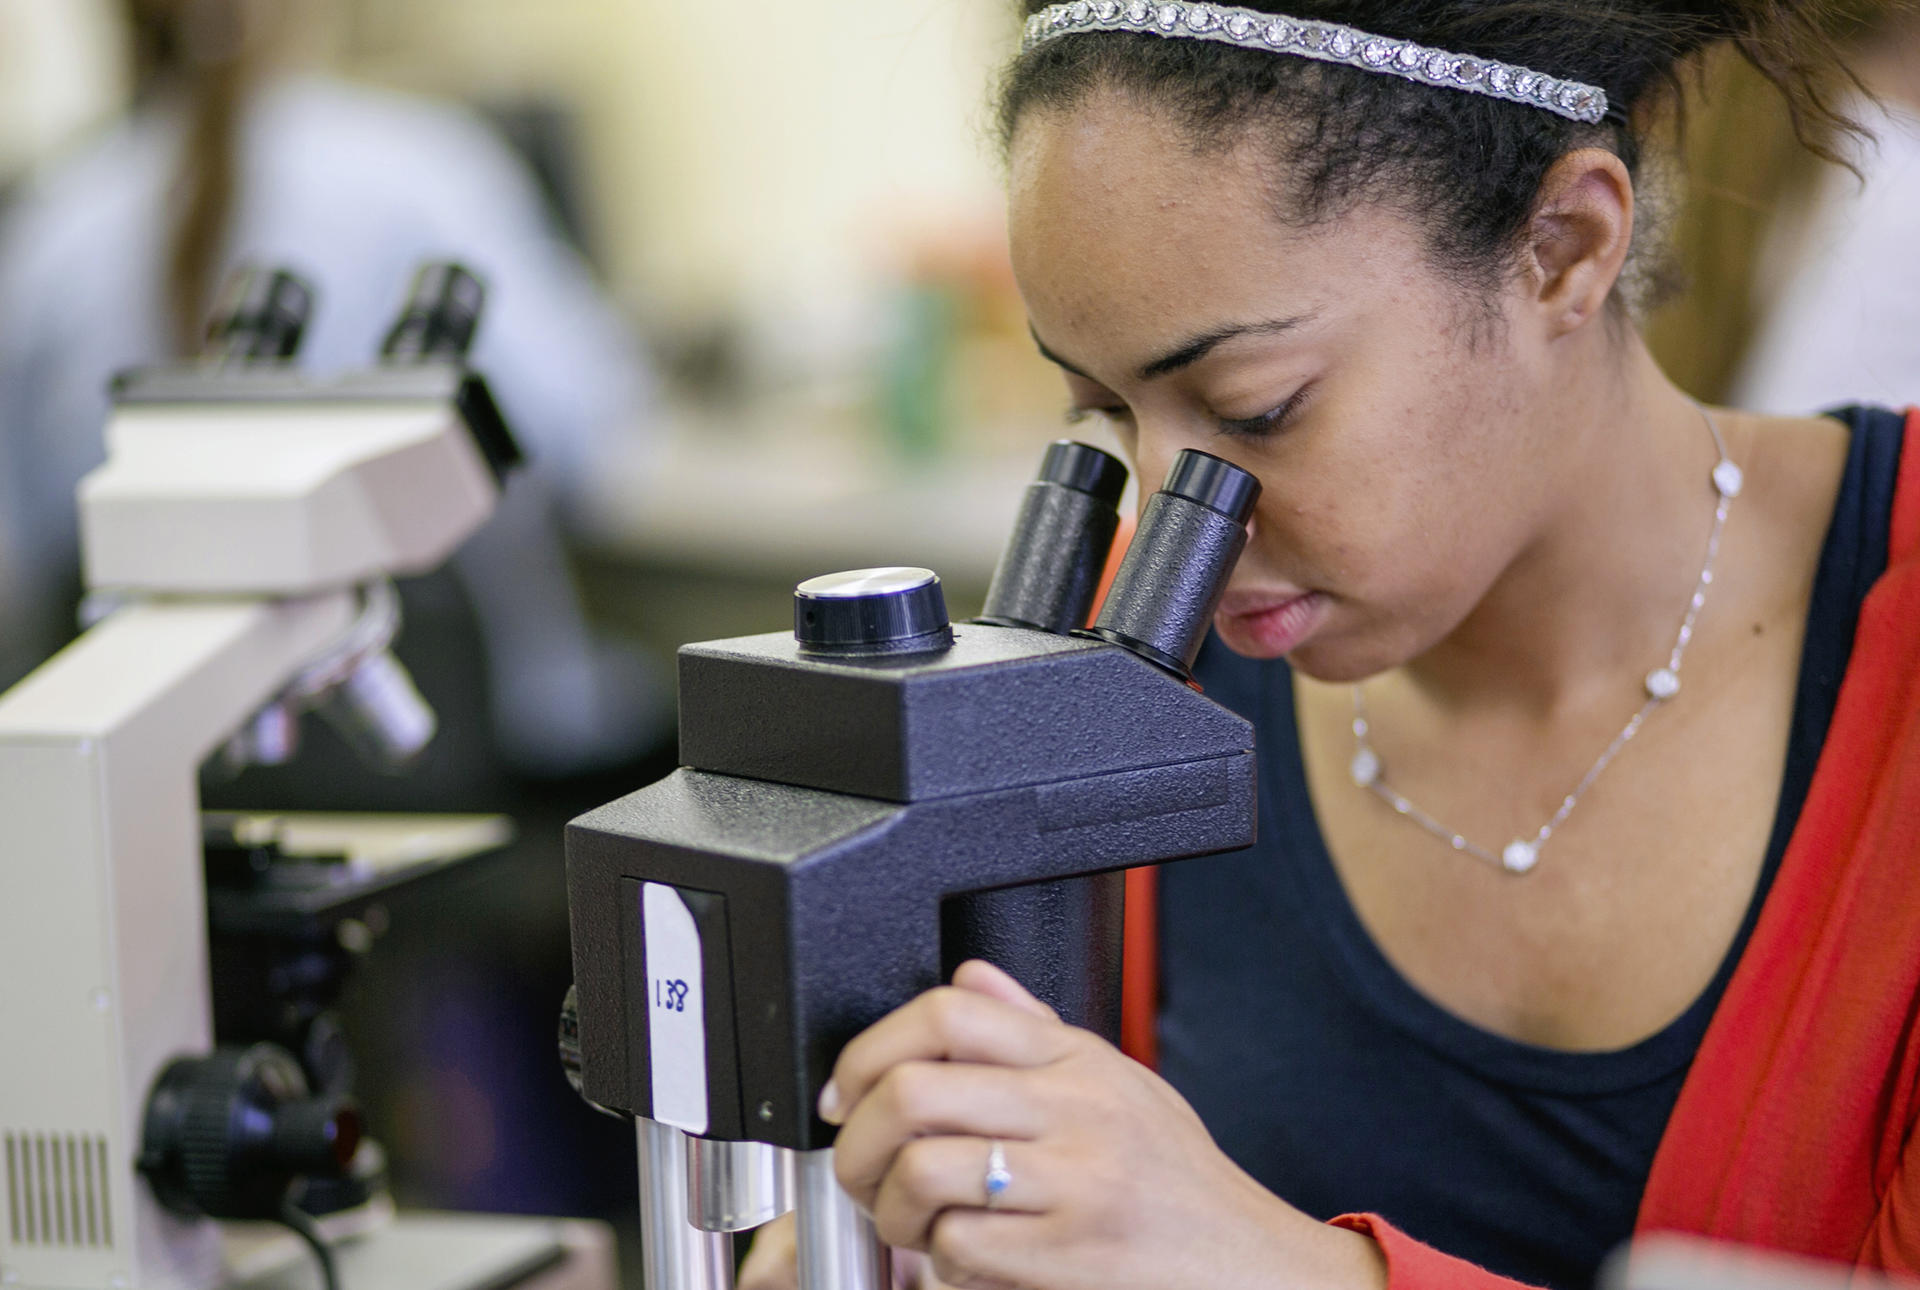 A young woman looks through a microscope.